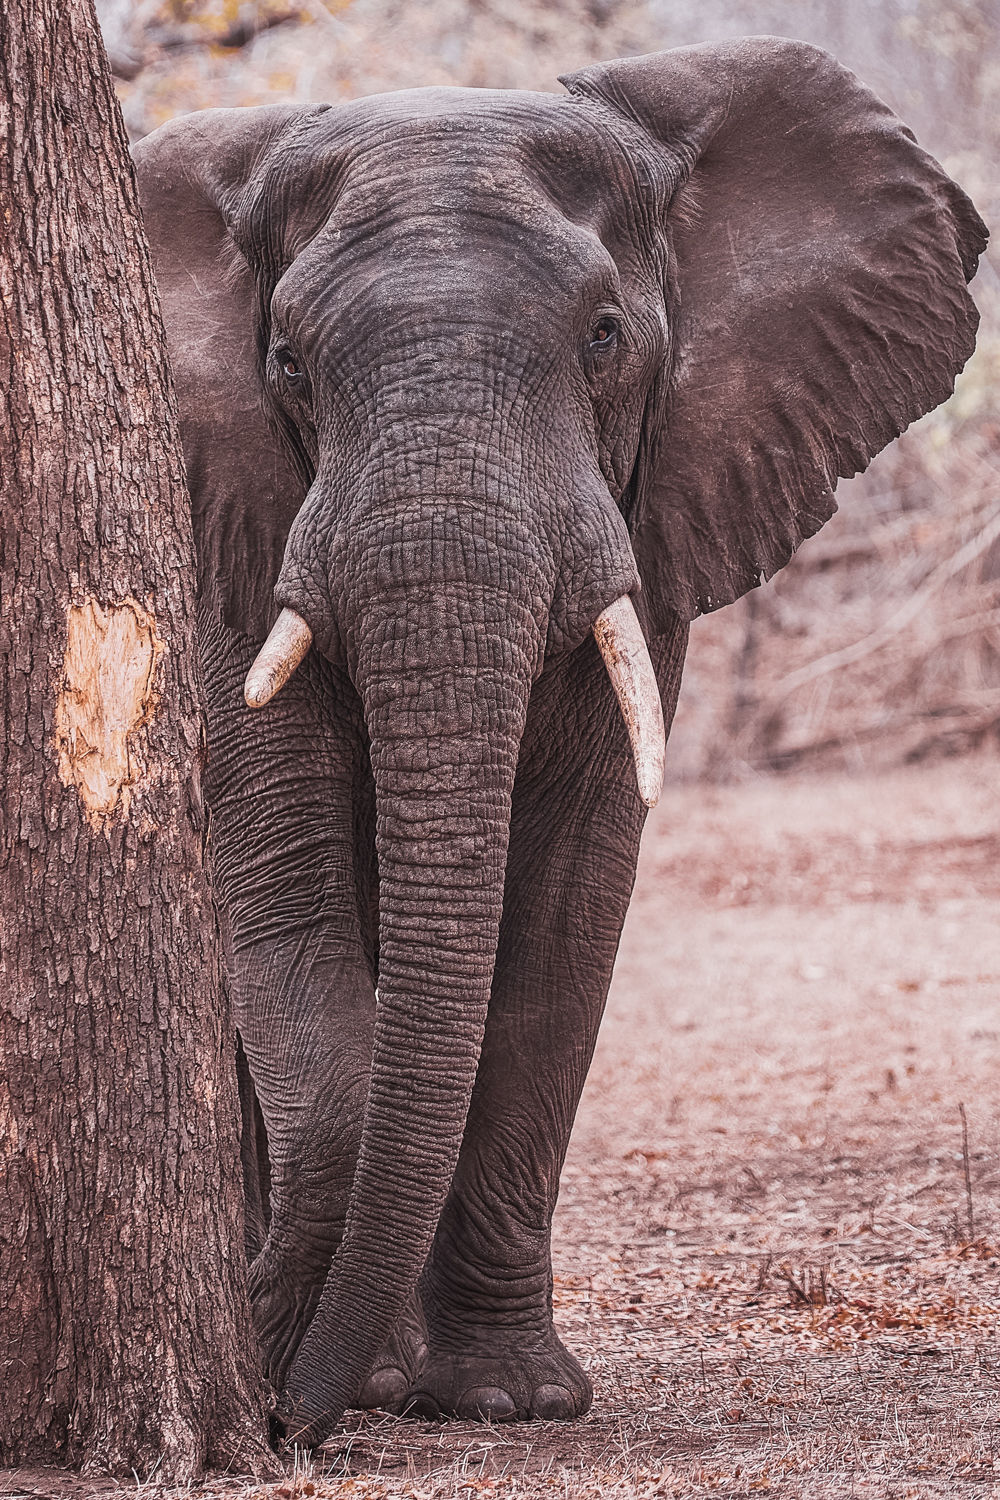 An African elephant (credit Nico Wills)